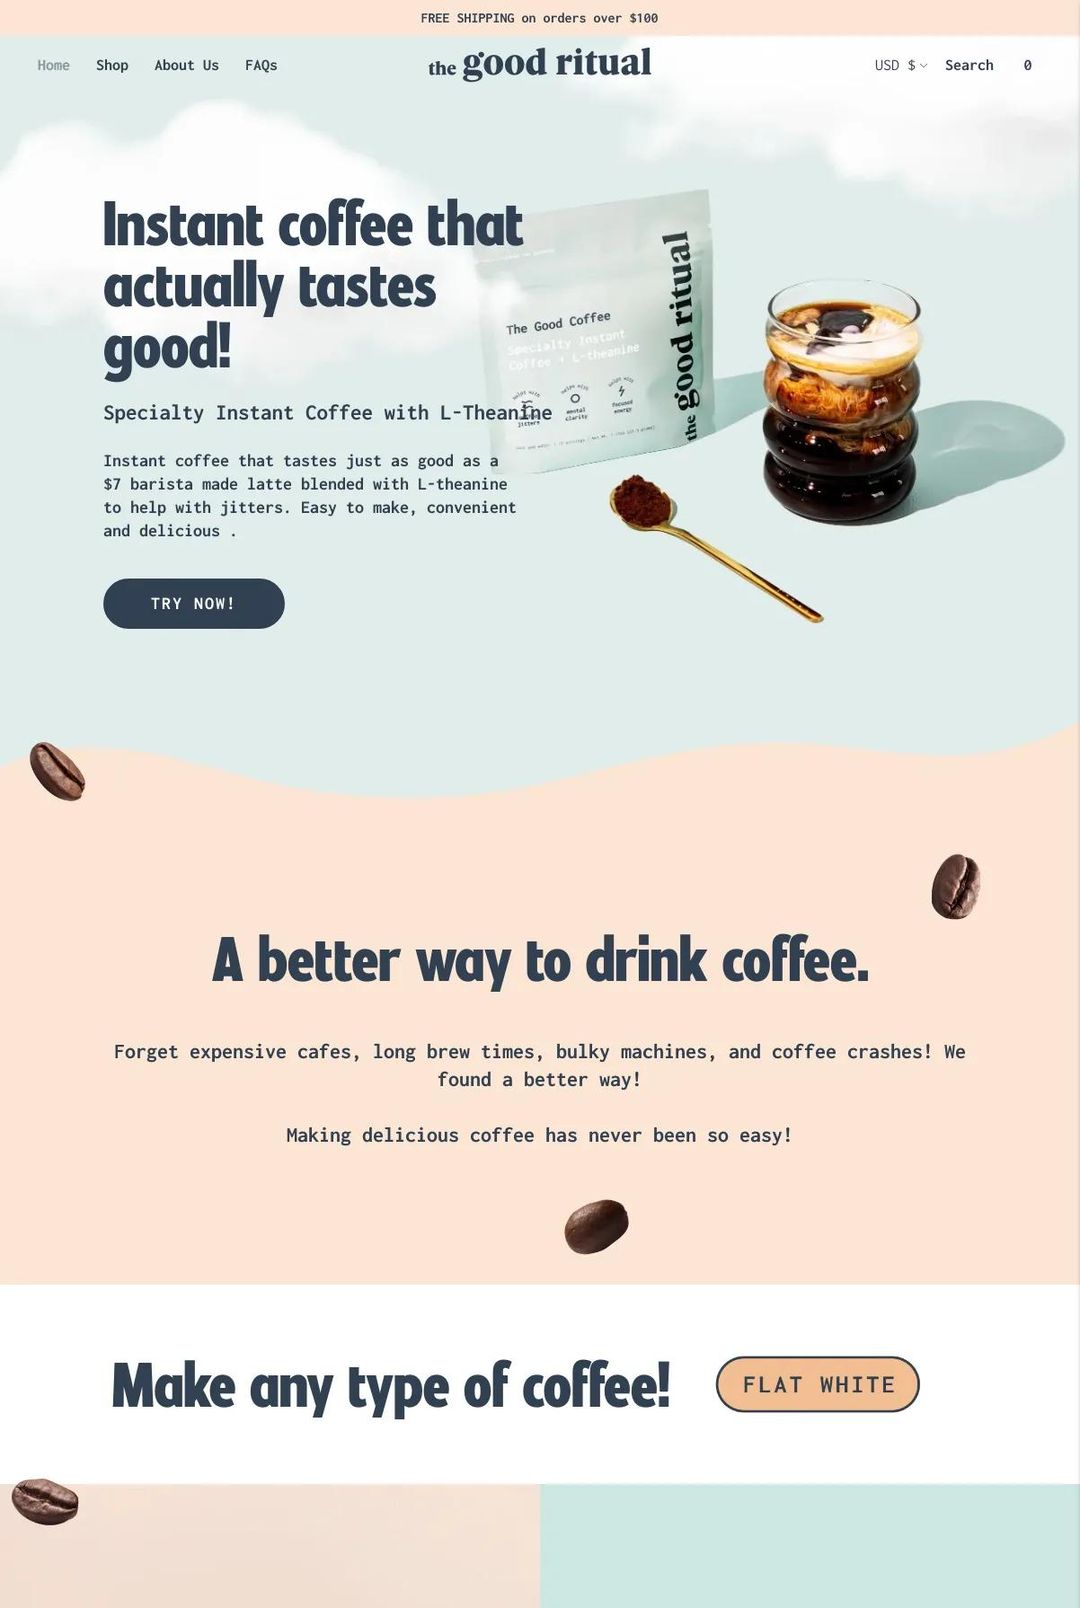 Screenshot 1 of The Good Ritual (Example Shopify Food and Beverage Website)